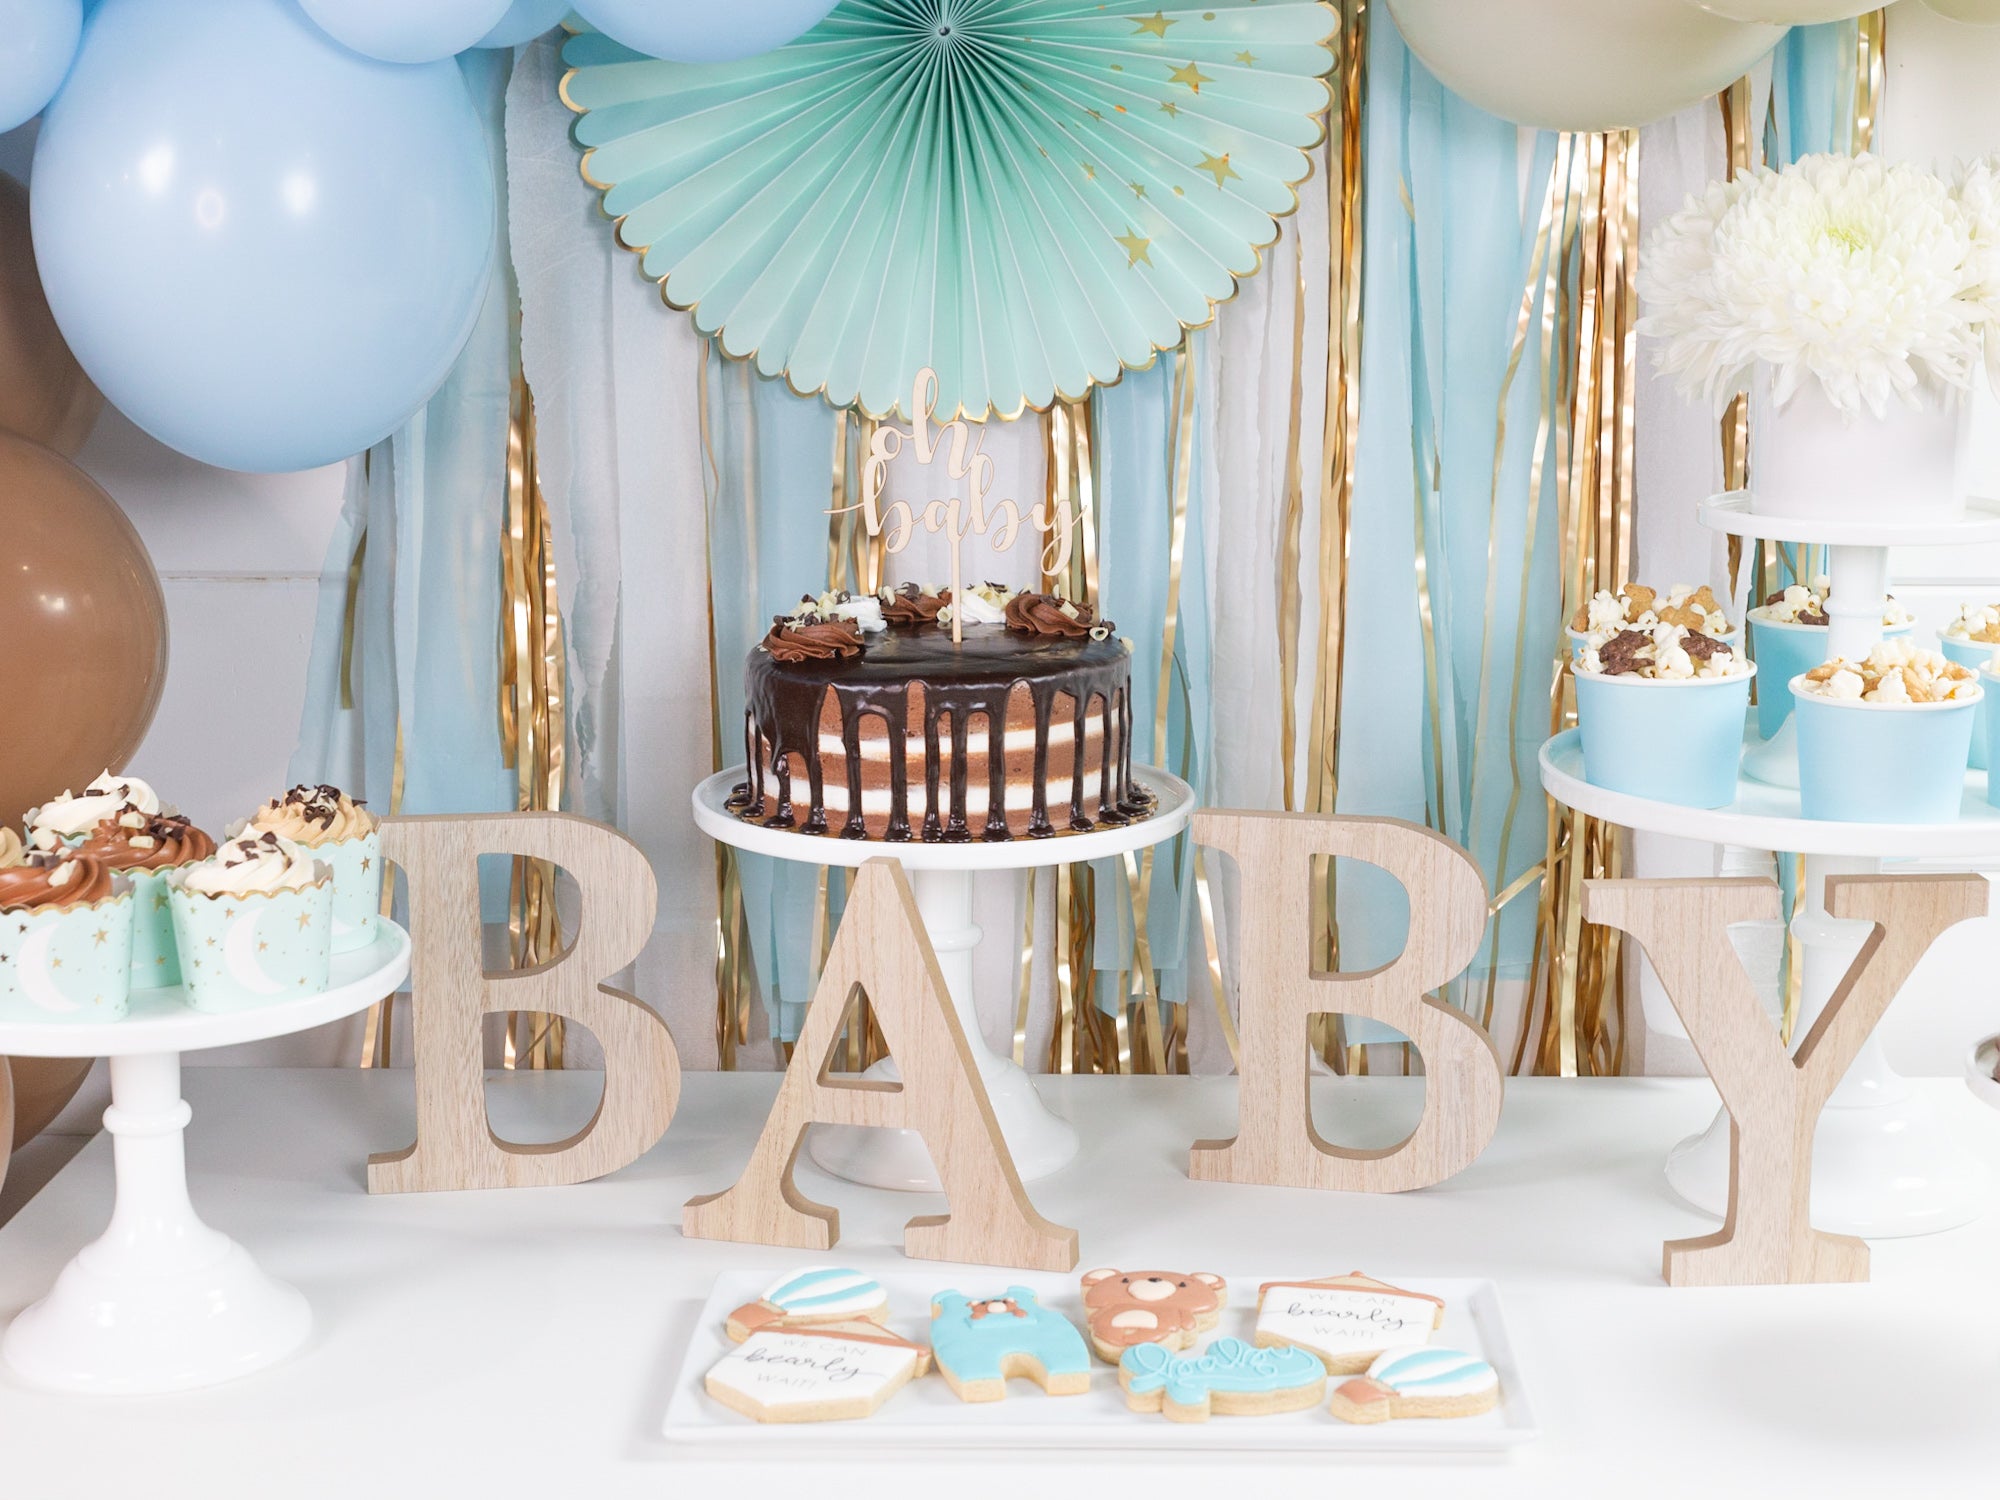 Wooden "BABY" Letters | The Party Darling